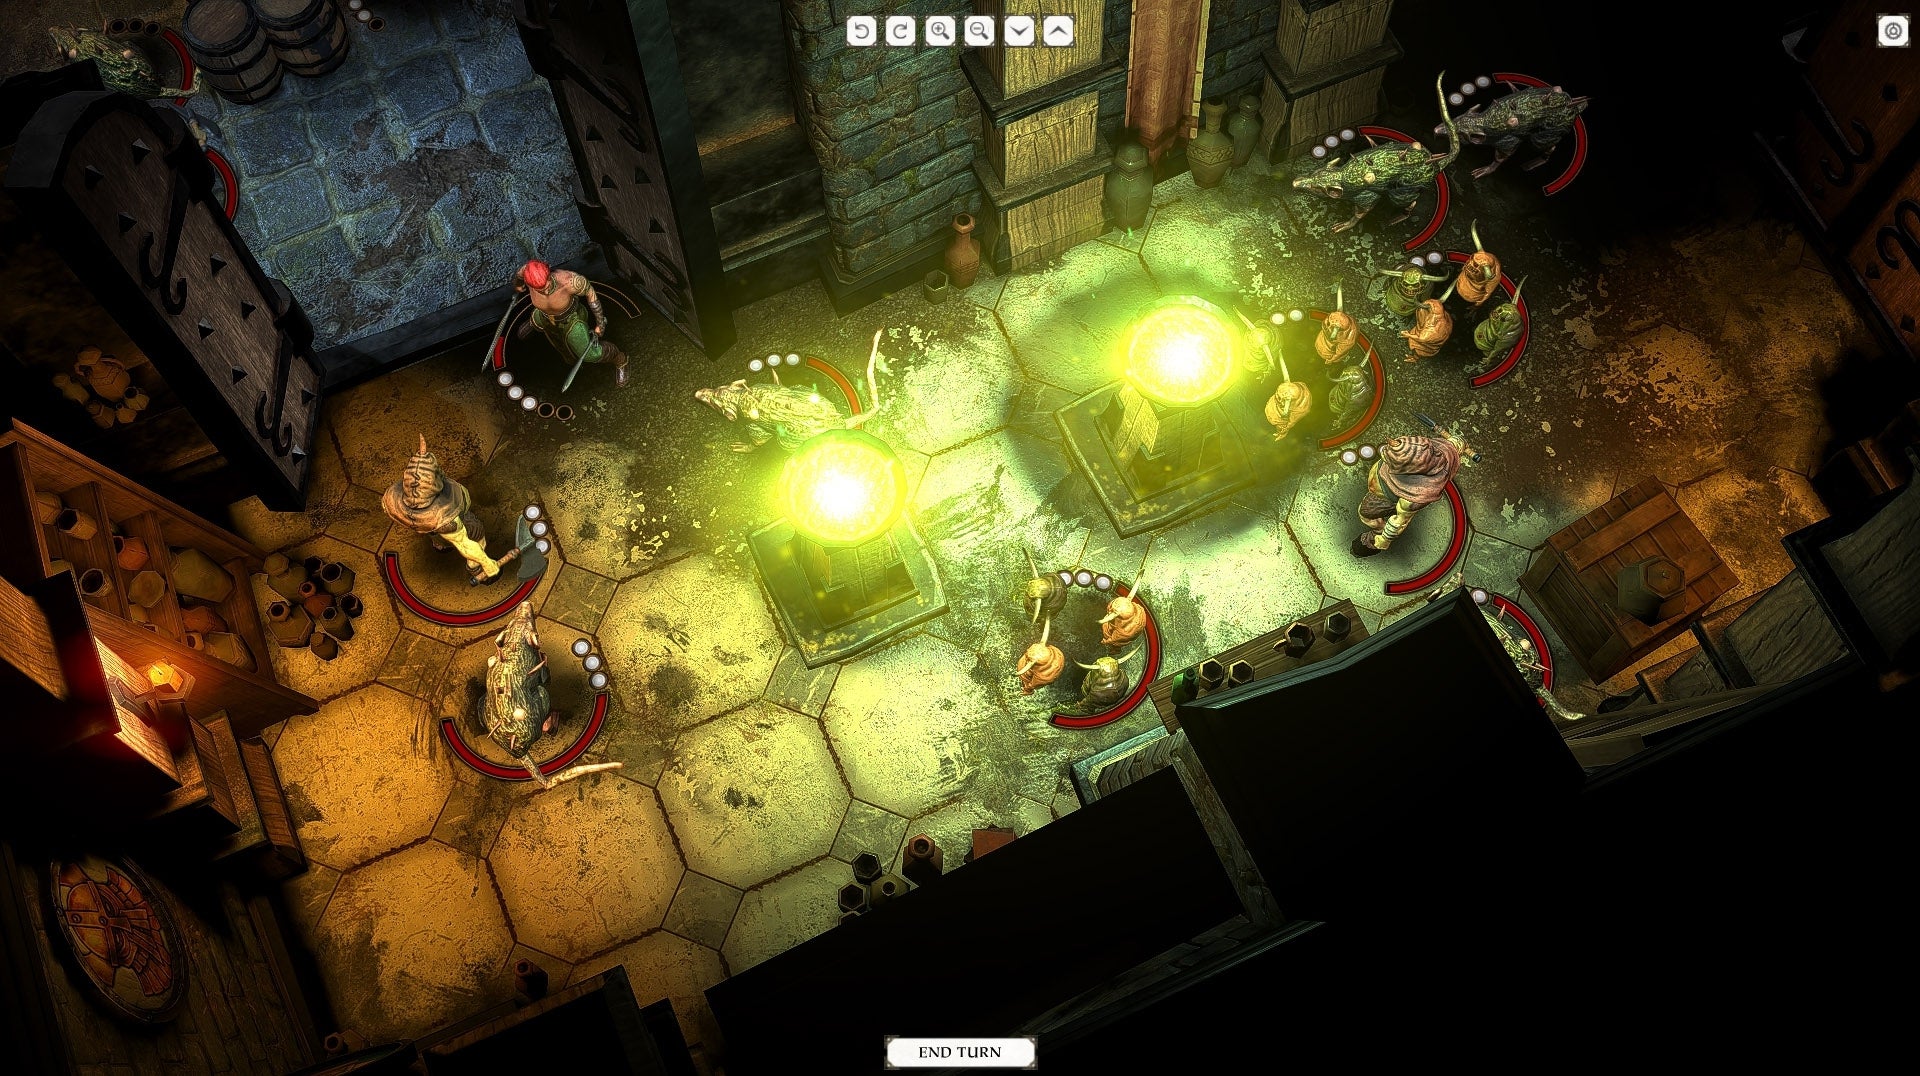 Image for Warhammer Quest 2 hits PC via Steam Jan 2019